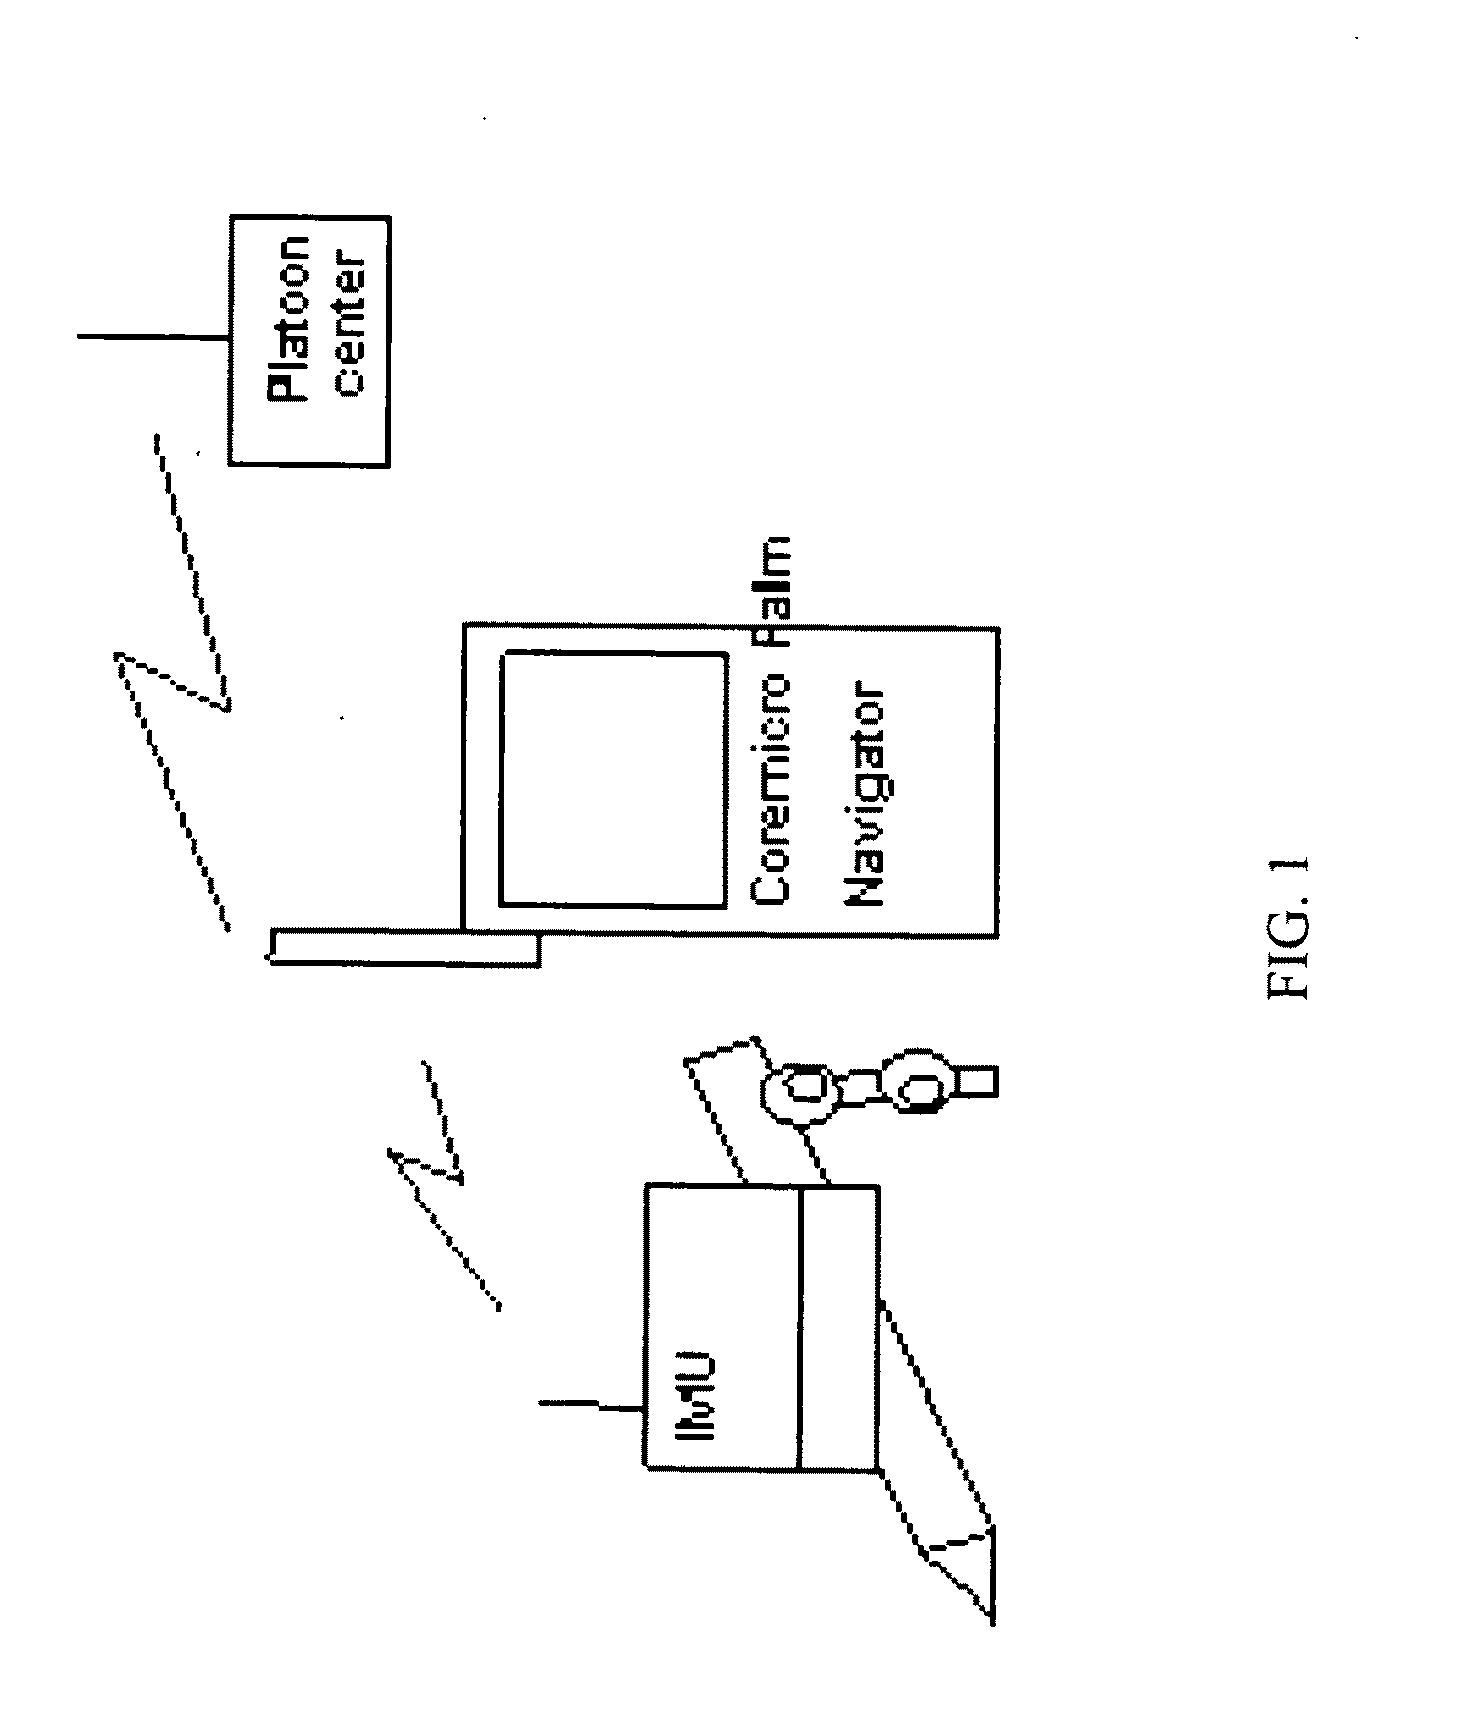 Miniaturized smart self-calibration electronic pointing method and system